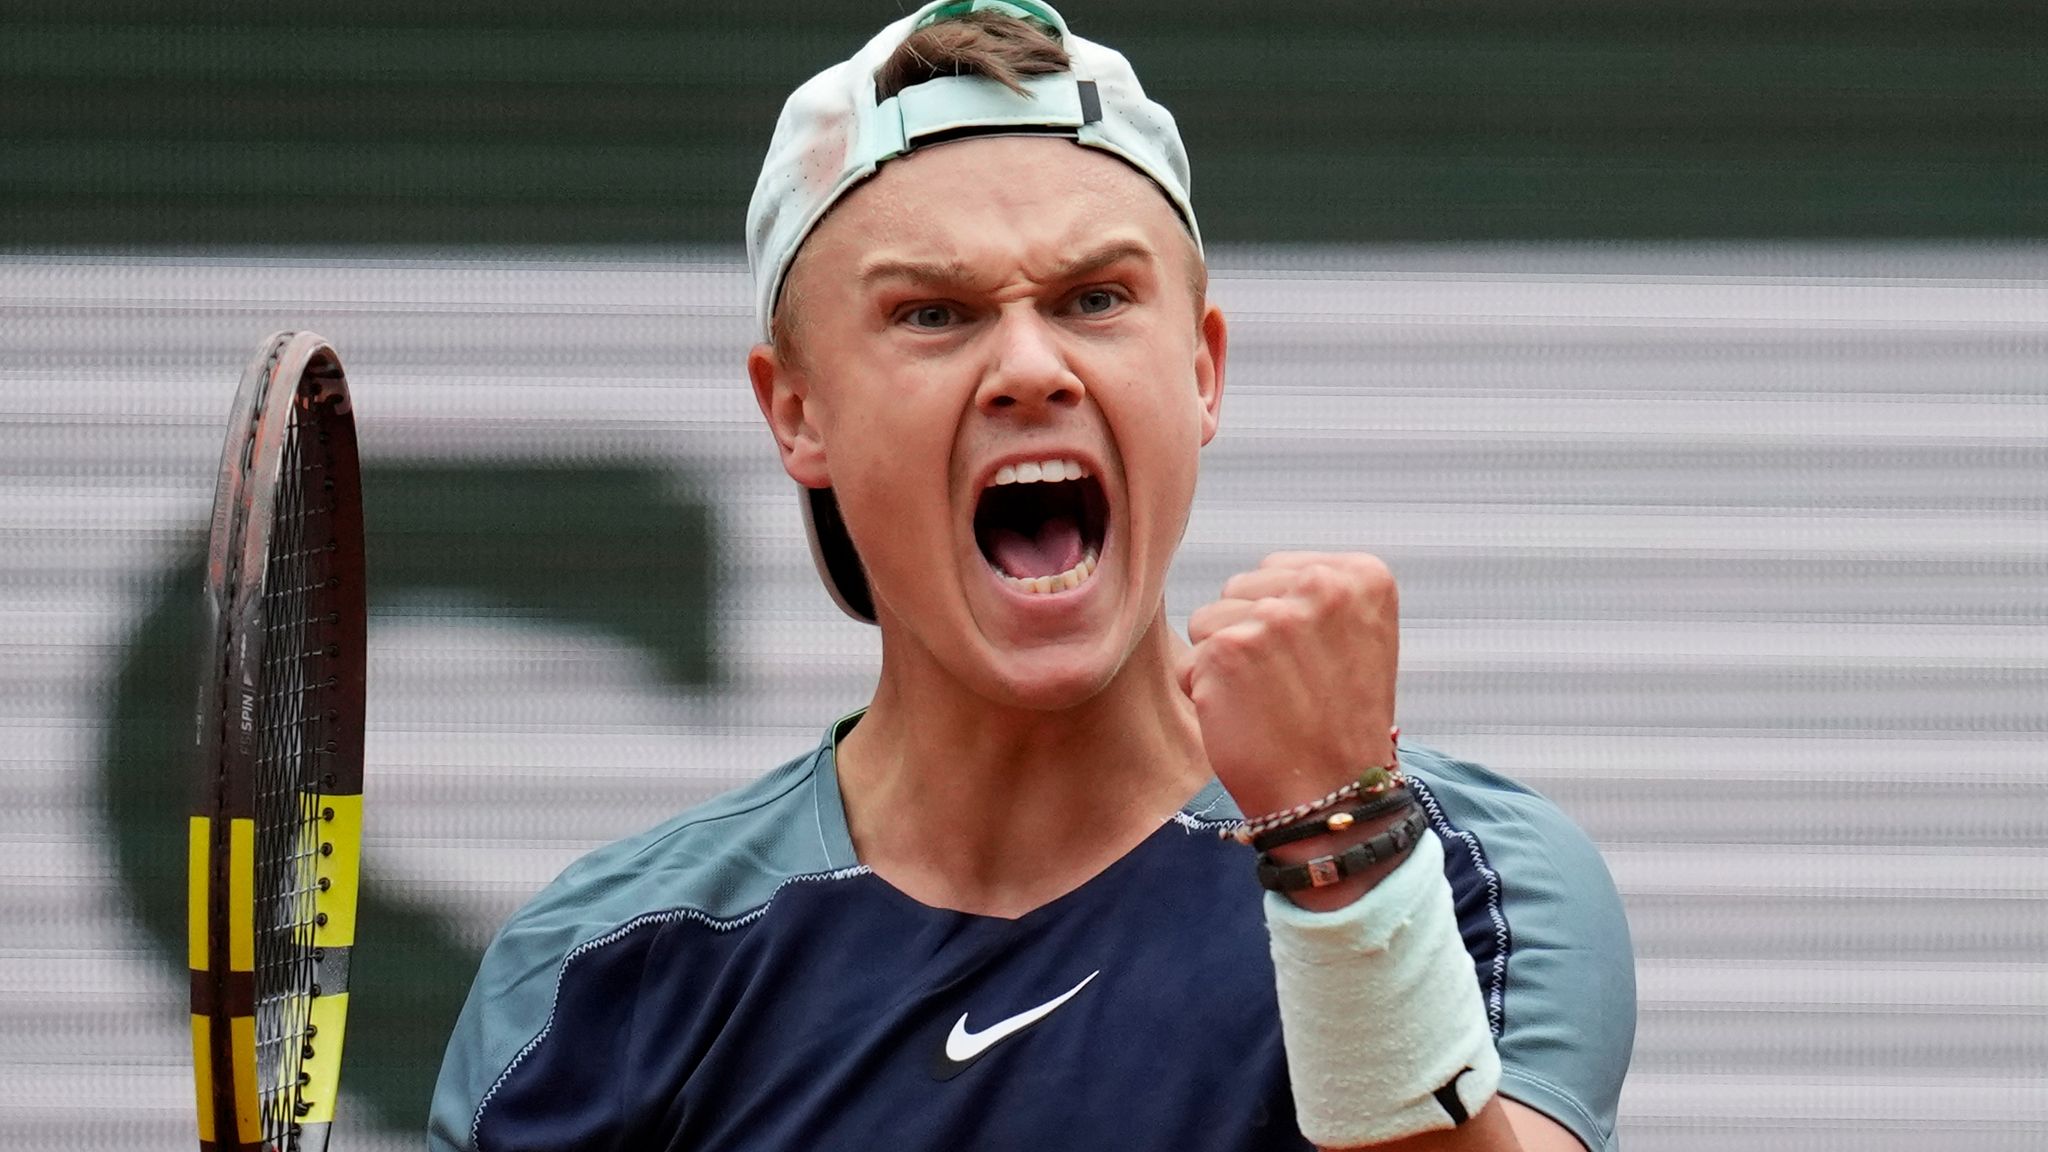 French Open Stefanos Tsitsipas knocked out by Danish teenager Holger Rune with Daniil Medvedev also beaten Tennis News Sky Sports